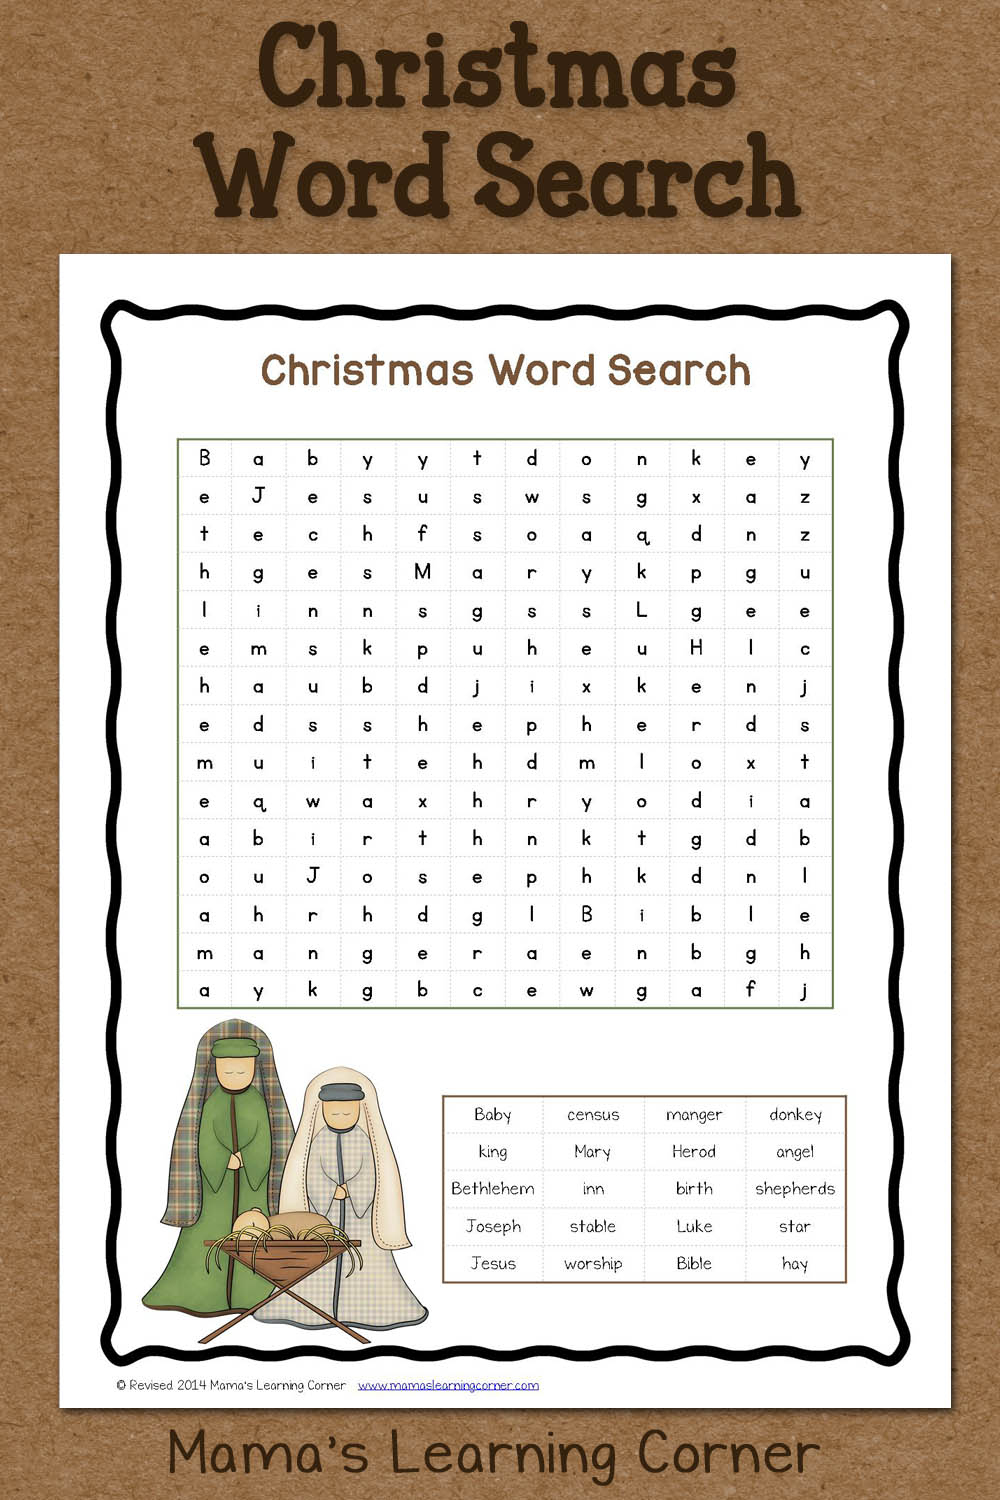 Christmas Word Search: Free Printable - Mamas Learning Corner - Printable Bible Puzzles For Preschoolers